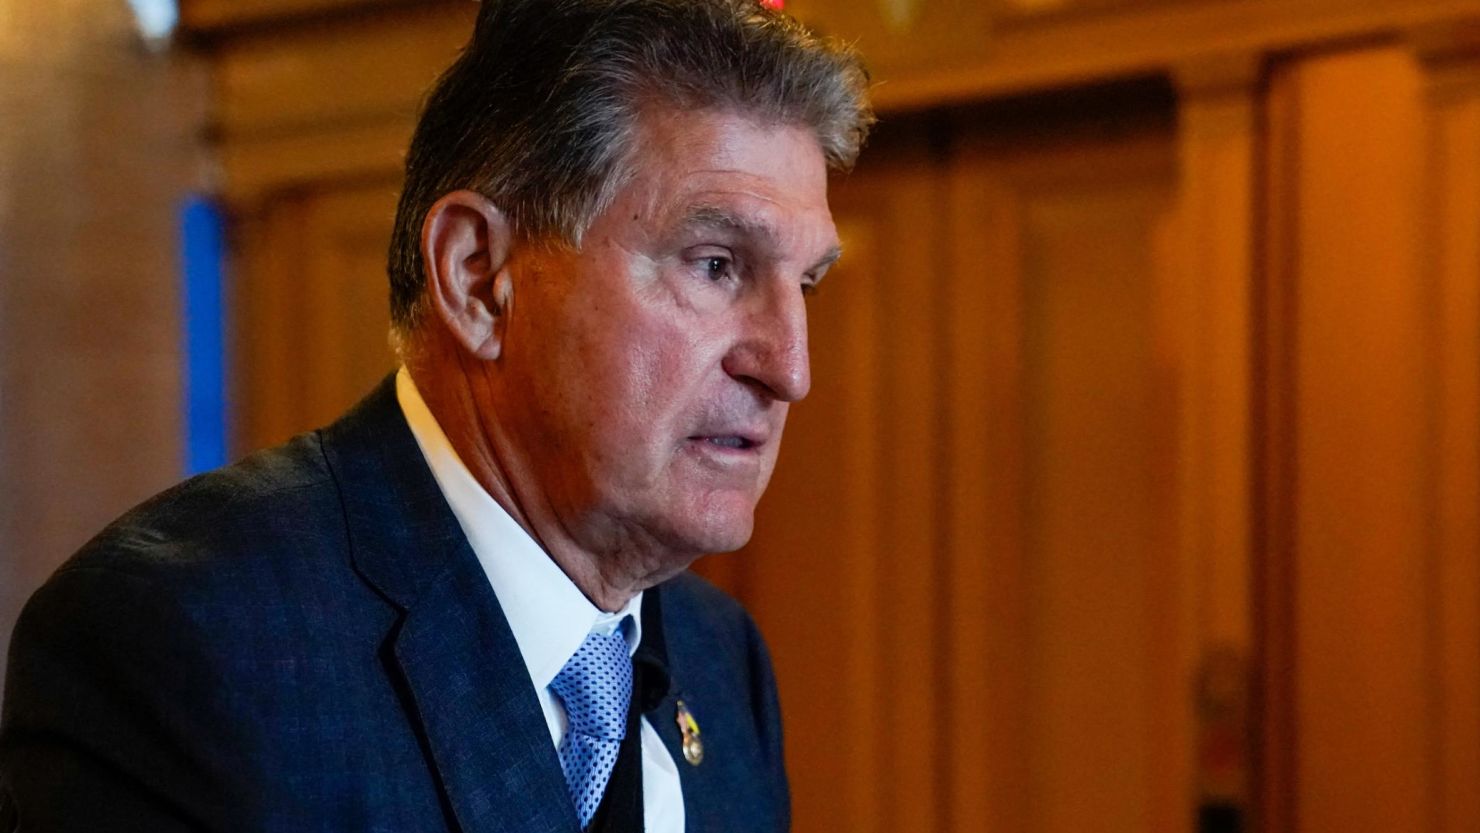 Democratic Sen. Joe Manchin of West Virginia leaves after a vote at the US Capitol in Washington, DC, September 6, 2022.